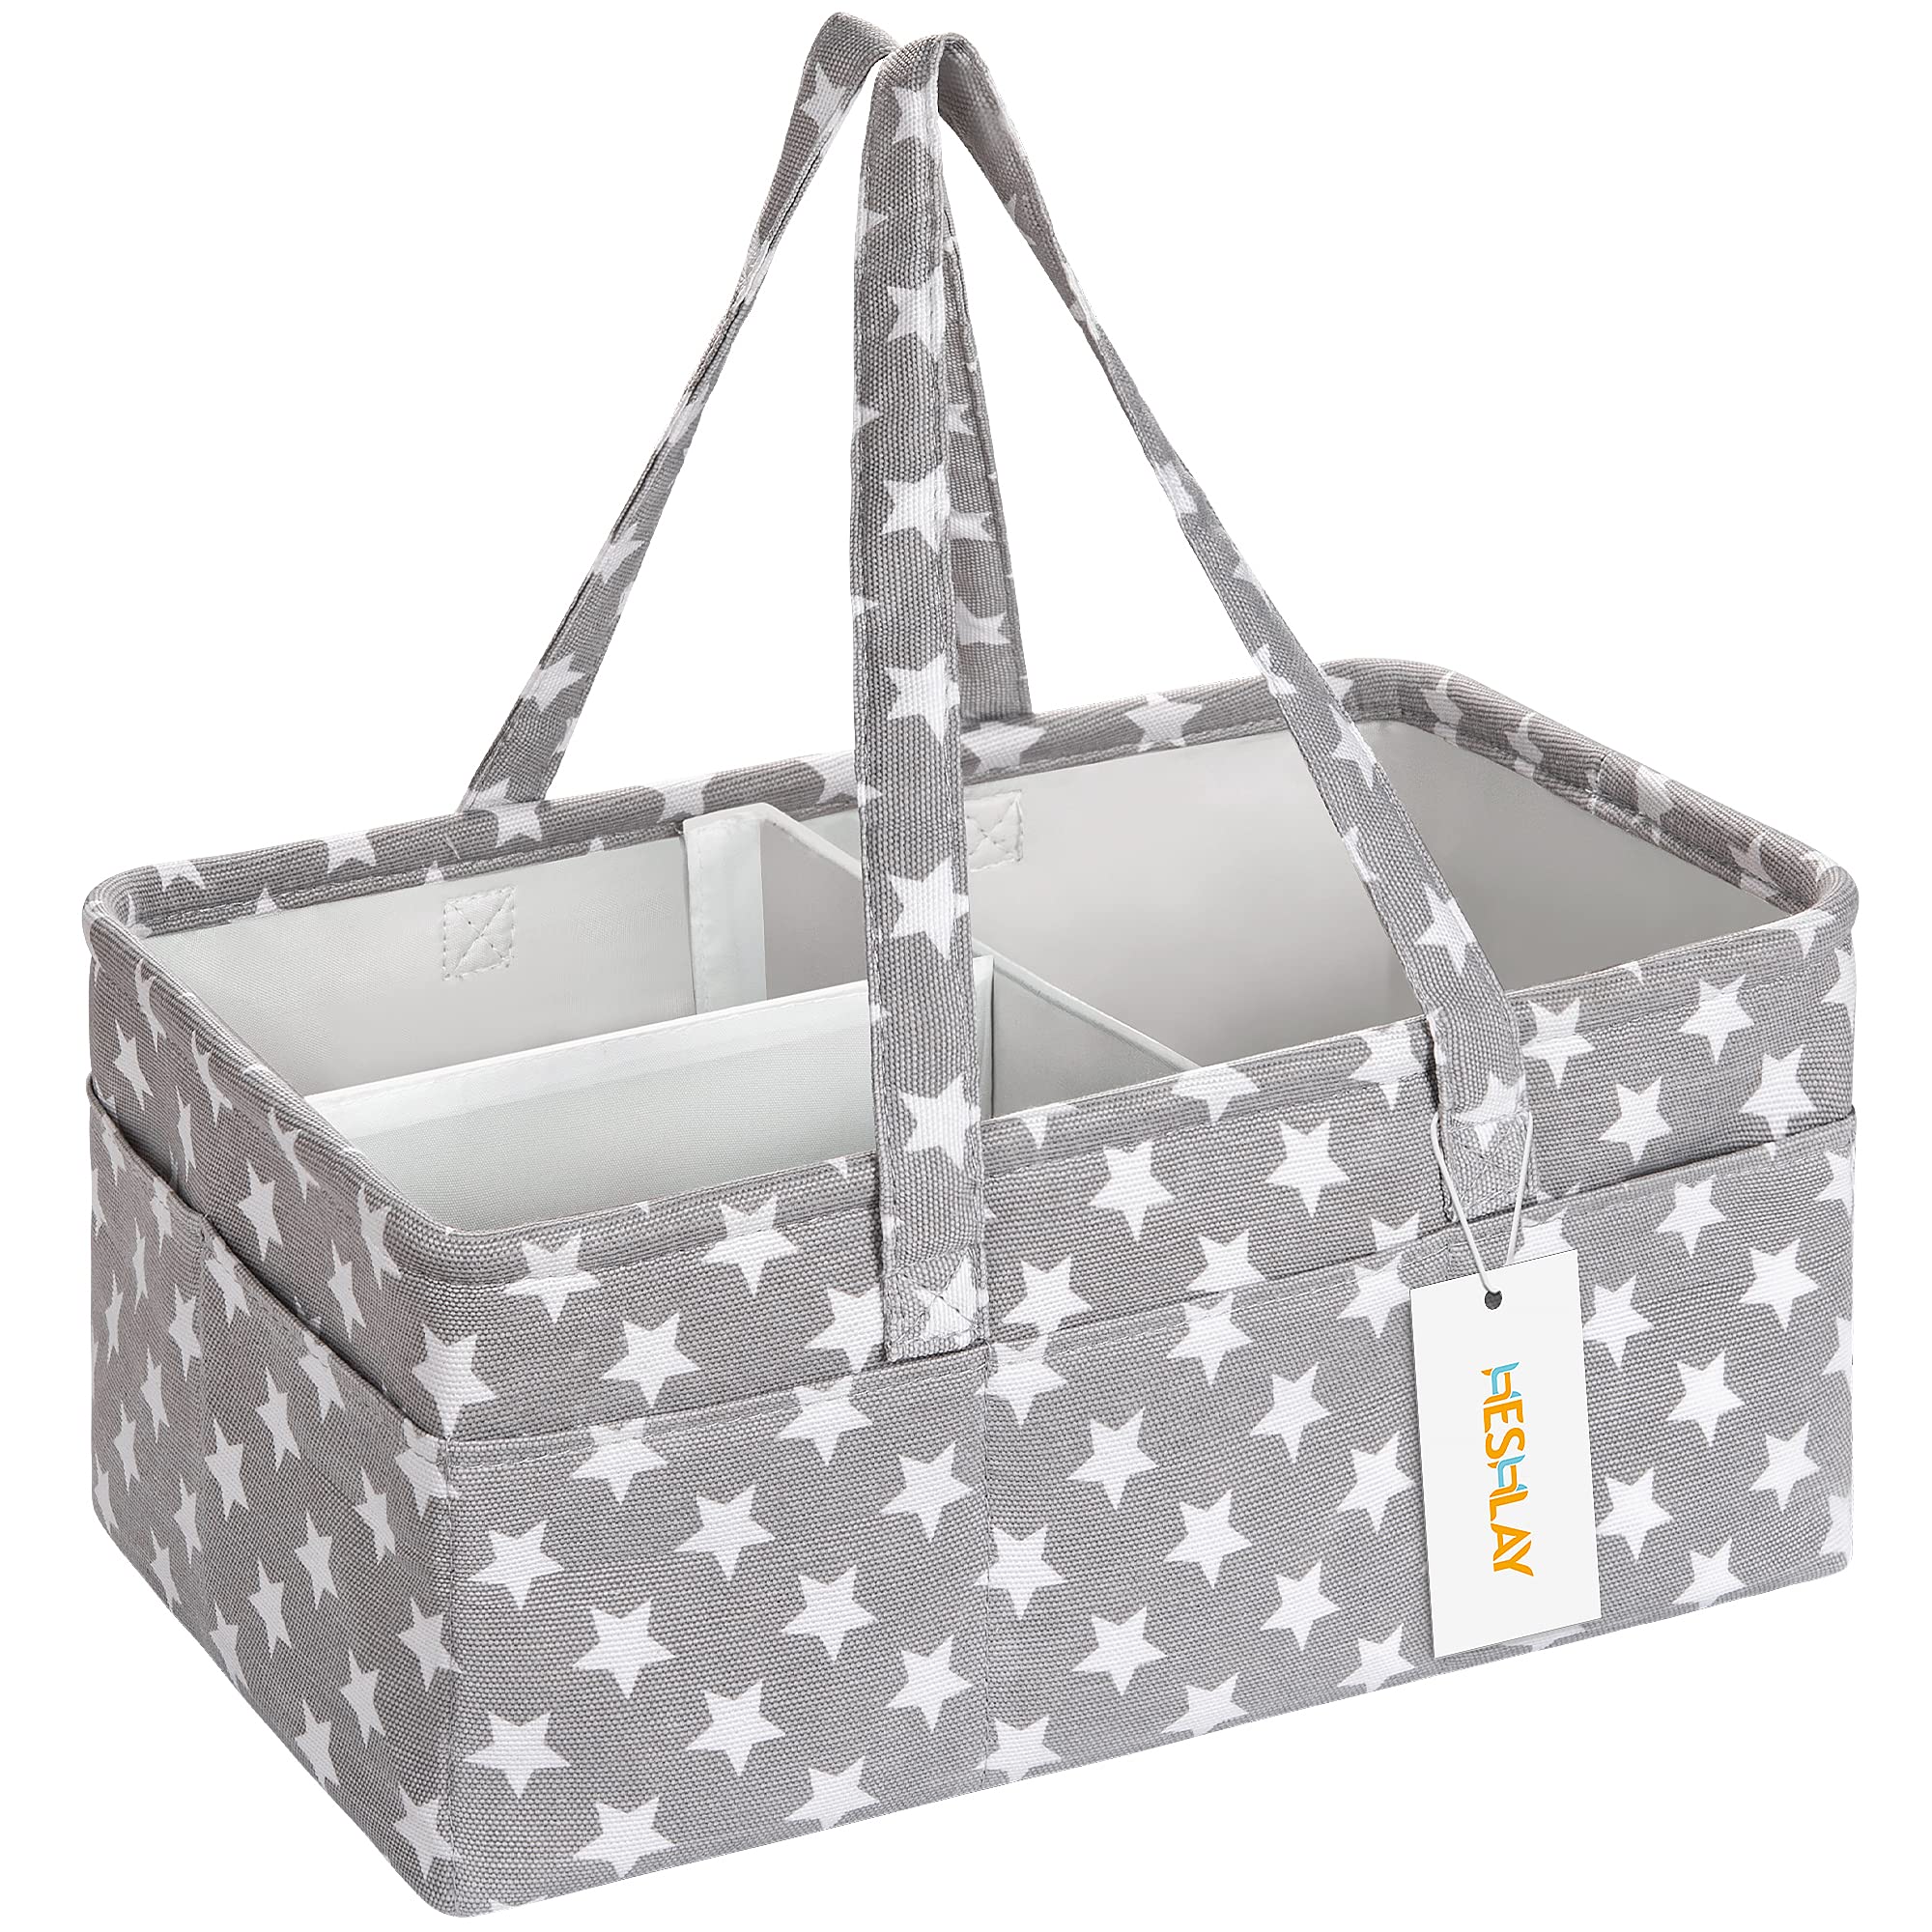 Heshlay Nappy Caddy - Sturdy Baby Diaper Organiser with Waterproof EVA on Polyester - Bag Storage for Storing Maximum Baby Supplies (Grey)